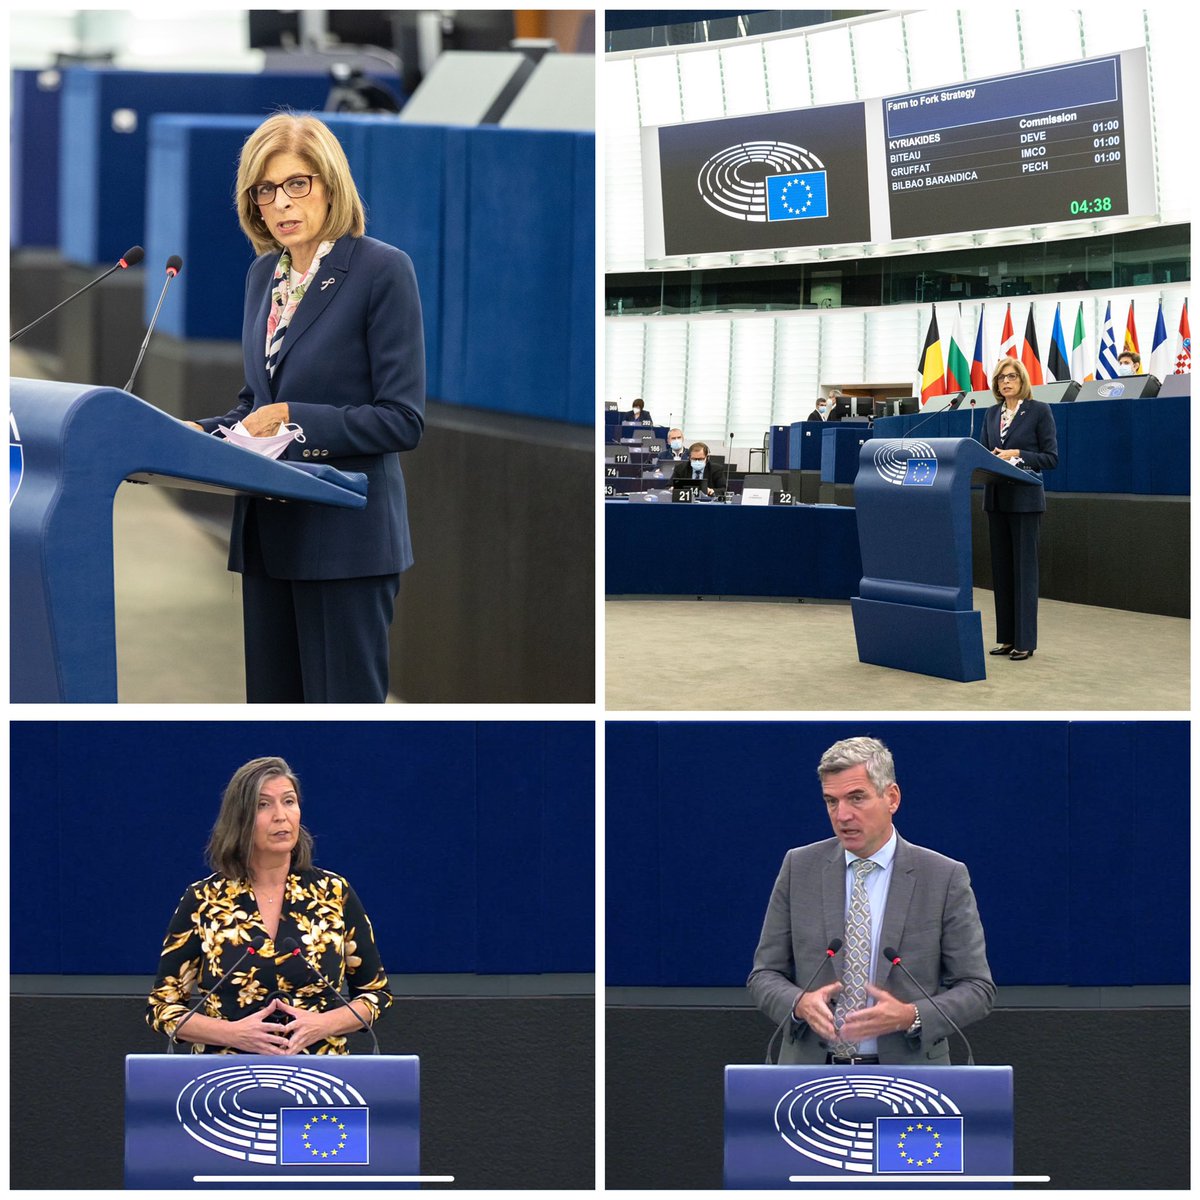 We are setting the 🇪🇺 on the path to a sustainable future on food production. 

With @Europarl_EN support, we are ready to take action, for this generation & the next.

This is an opportunity we cannot miss. The planetary risk is one that we cannot afford to take.

#EUFarm2Fork